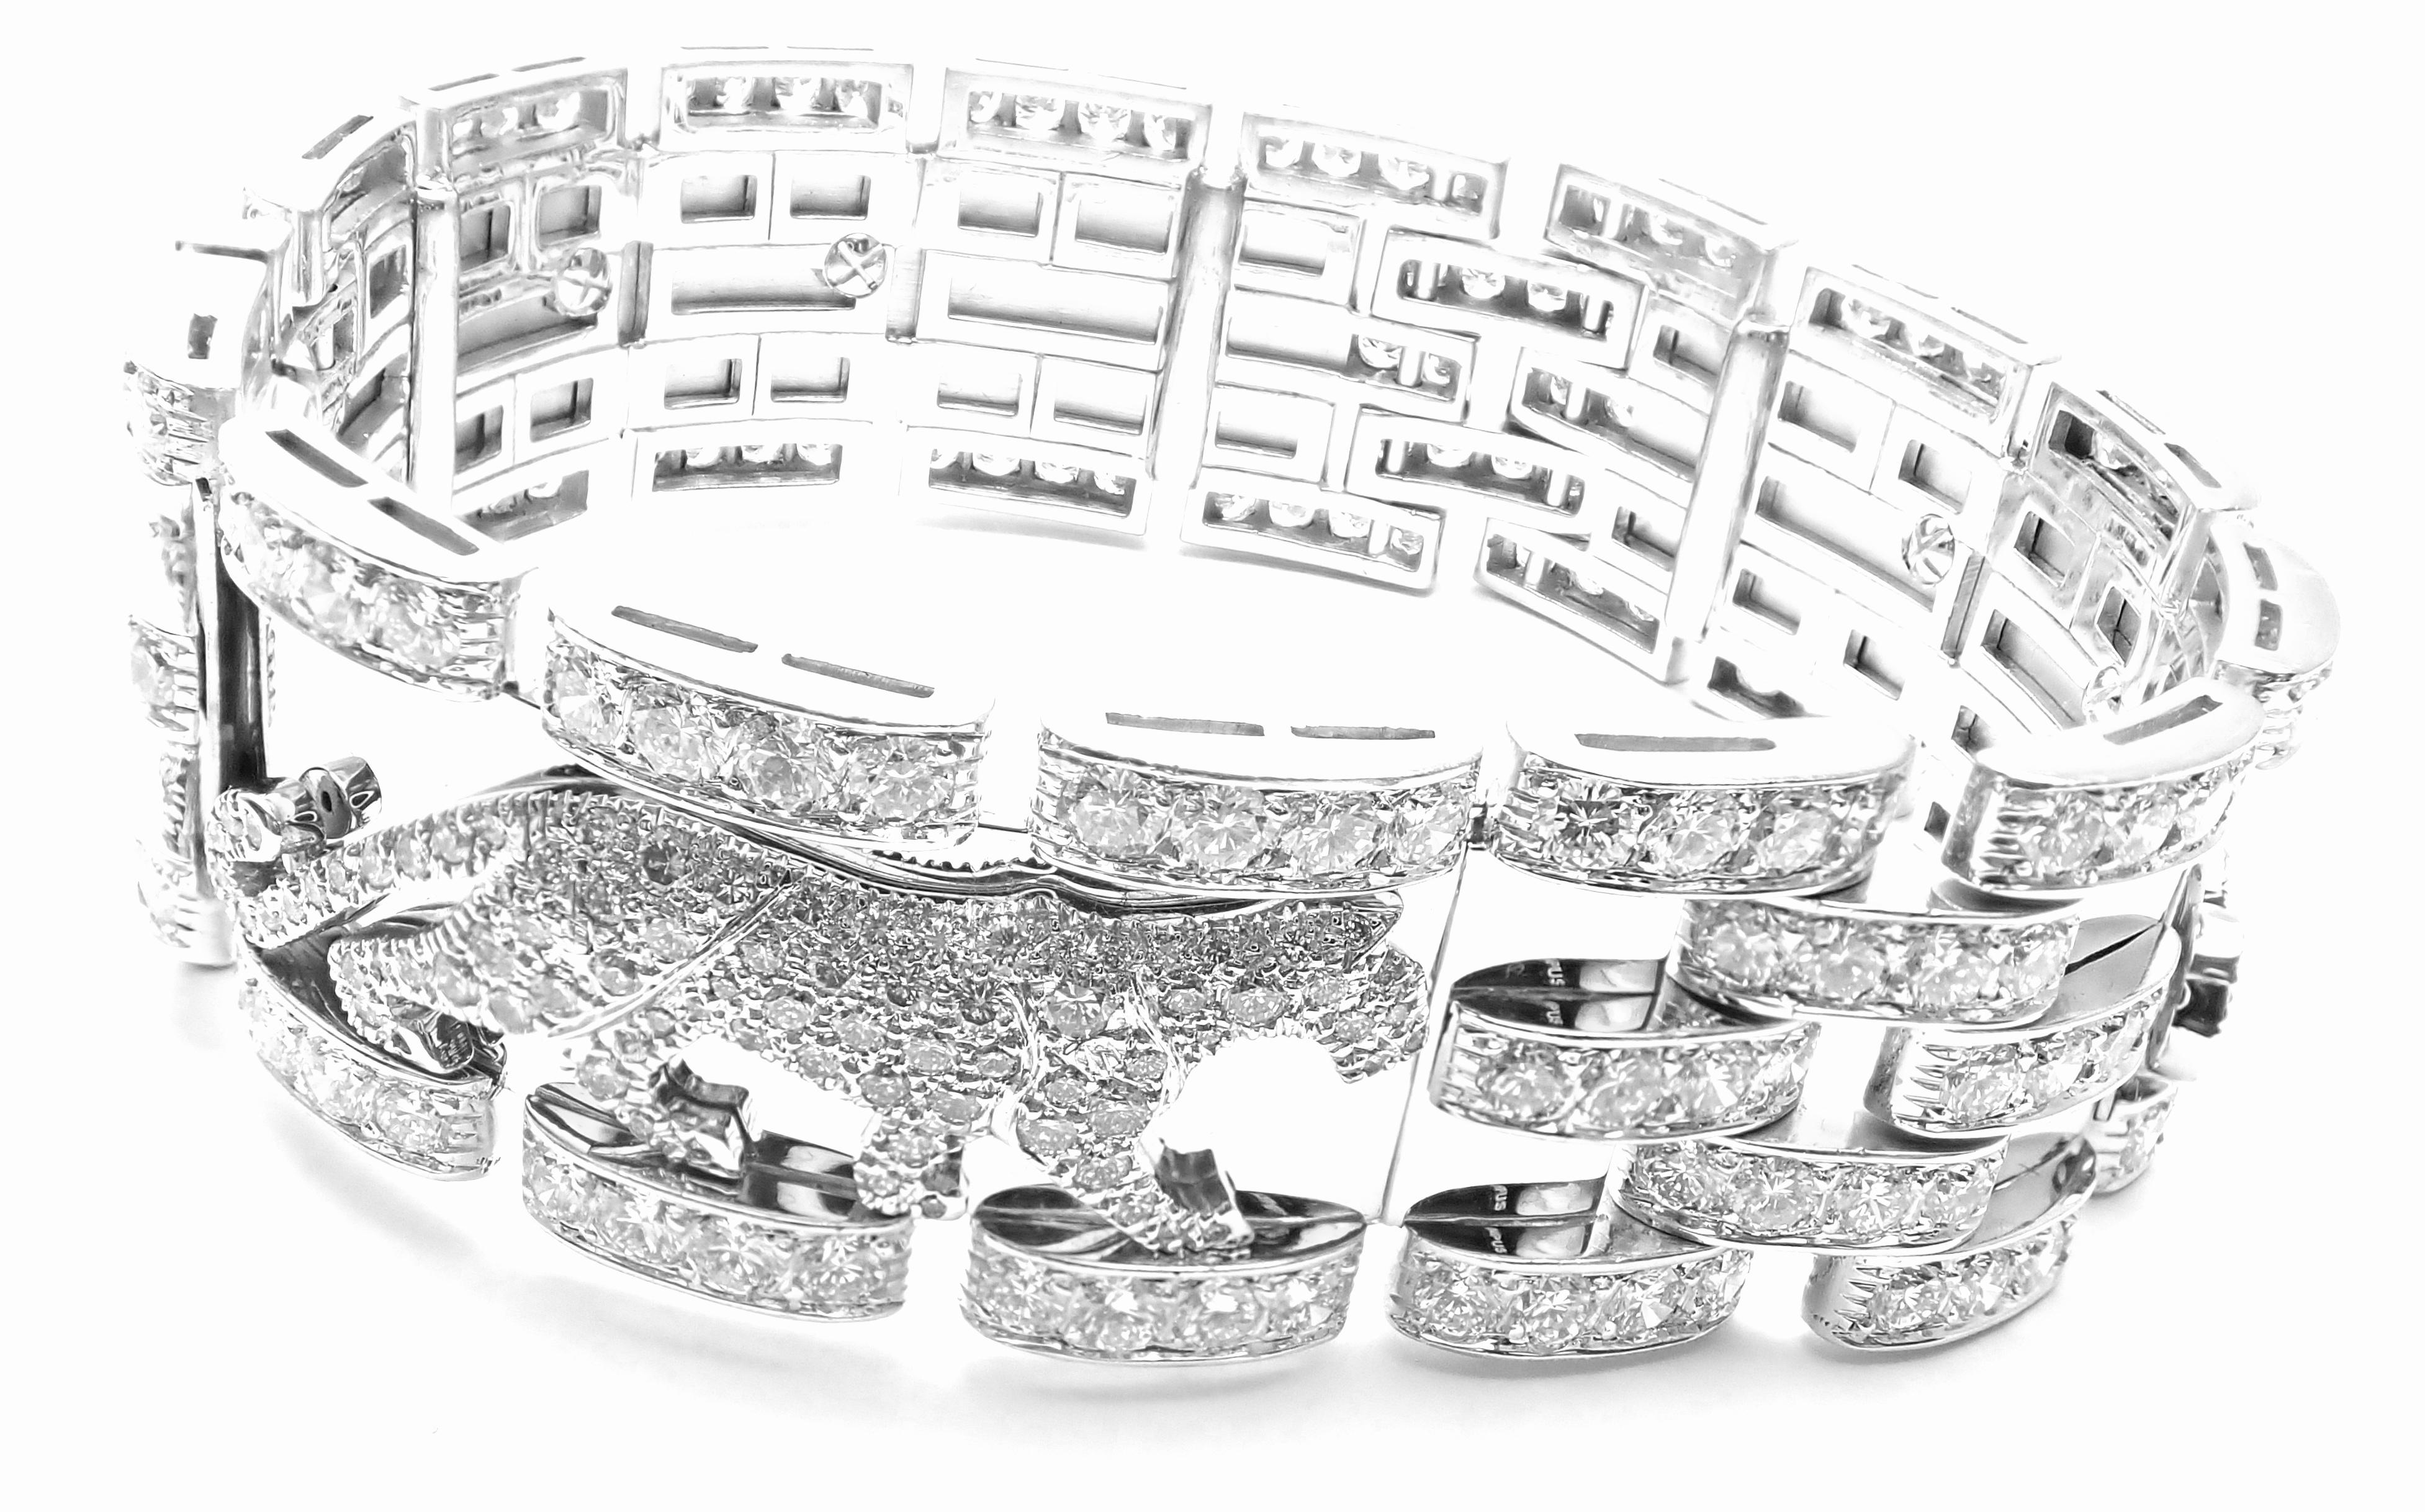 18k White Gold Diamond Walking Panther Bracelet by Cartier. 
Width 417 Round brilliant cut diamonds E color, VVS1 clarity total weight approx. 18.5ct
This watch comes with original Cartier box.
Details:
Length: 7 1/4